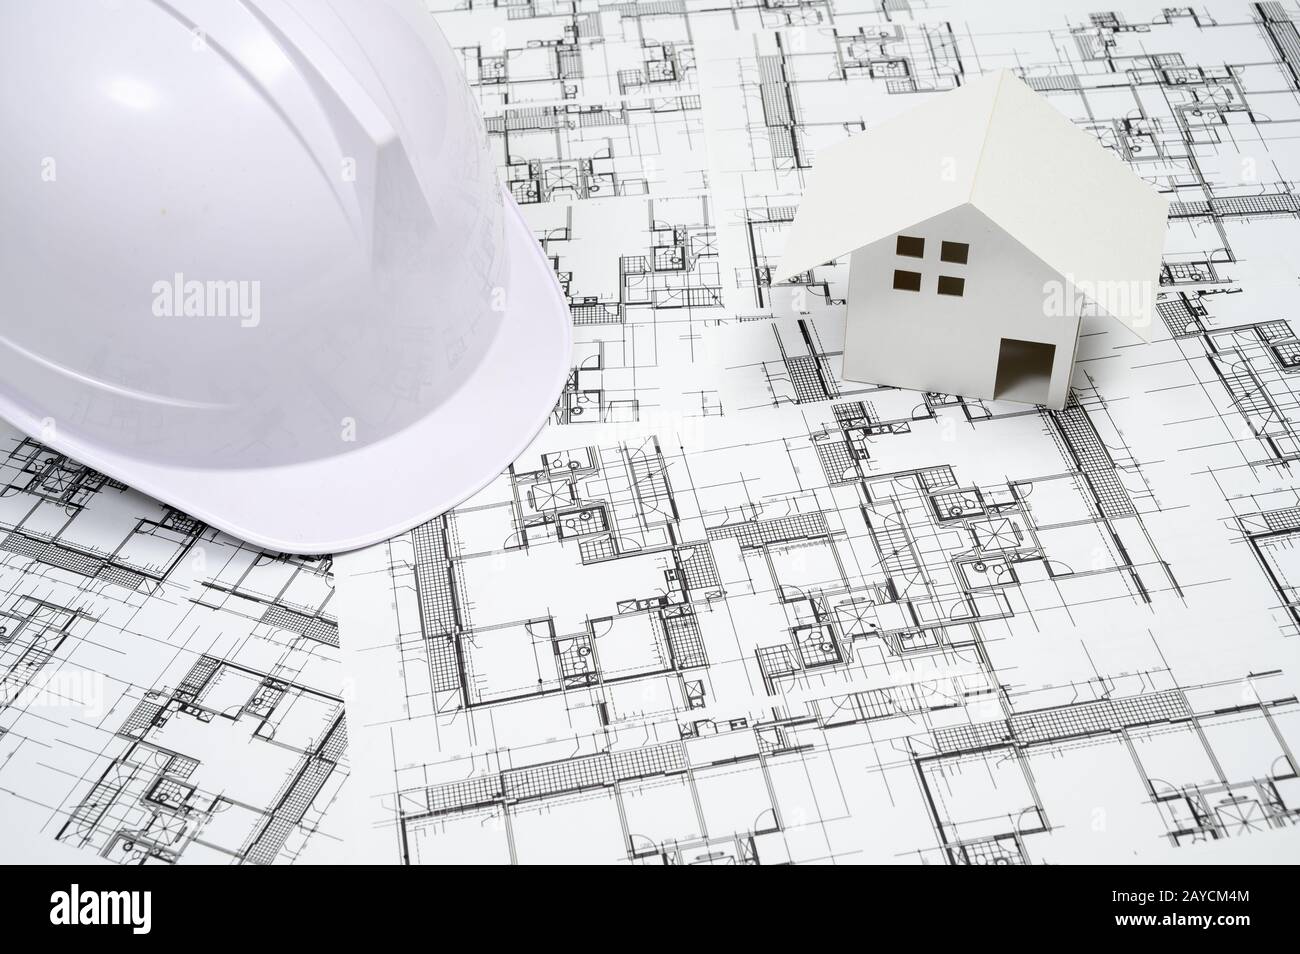 Construction industry concept with a hard hat on architectural drawing. Stock Photo